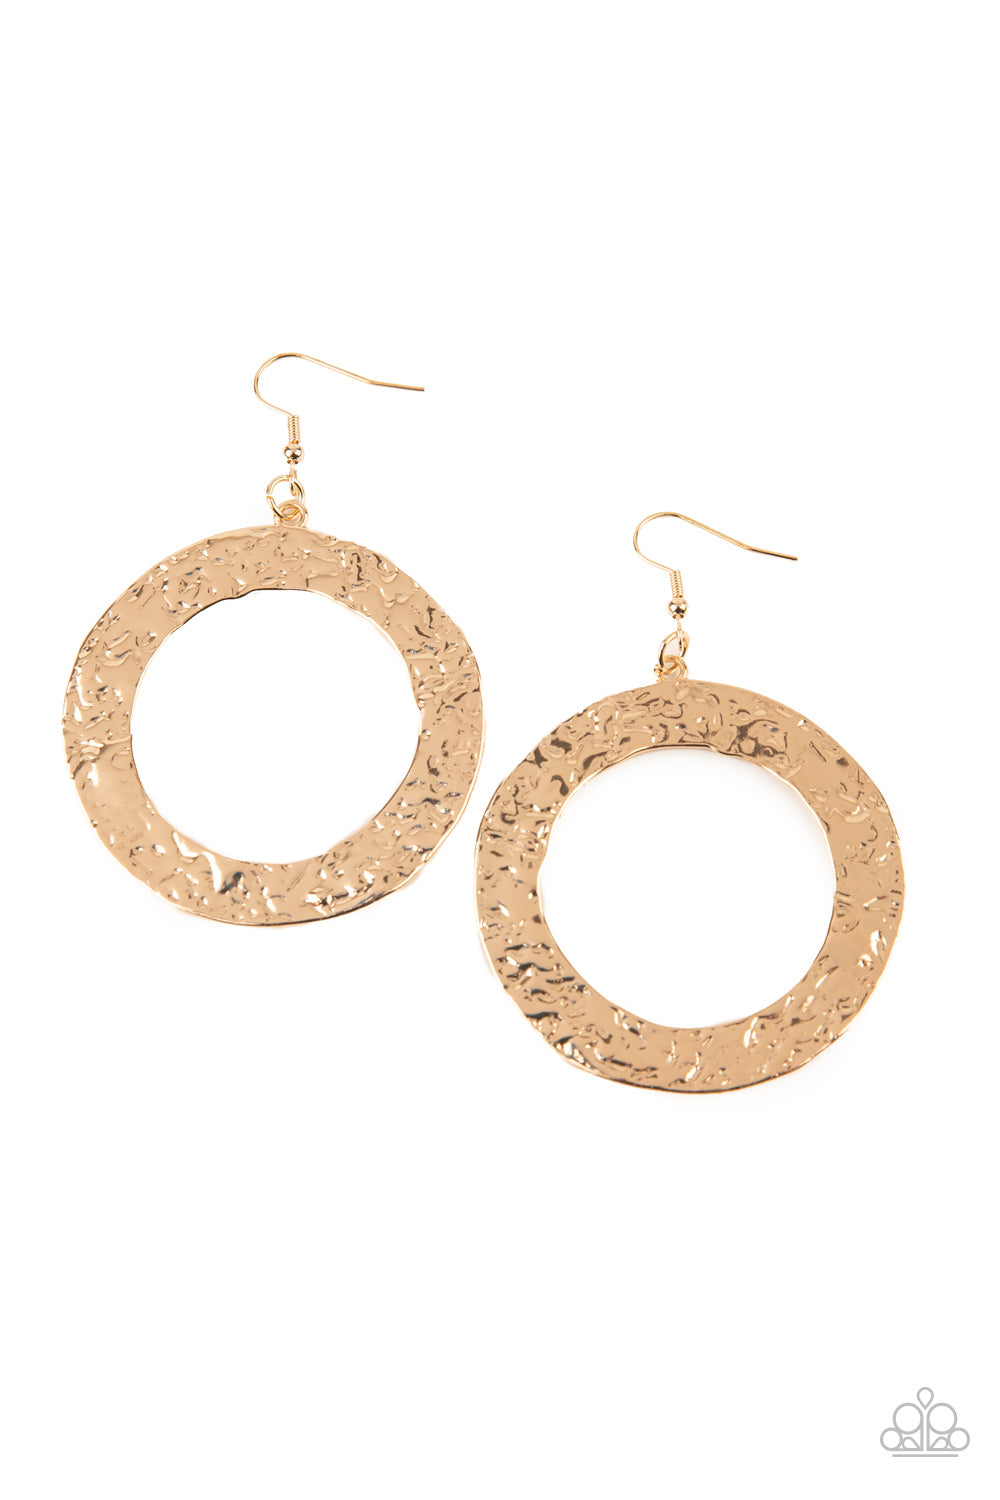 Paparazzi Accessories PRIMAL Meridian - Gold Earrings - Lady T Accessories